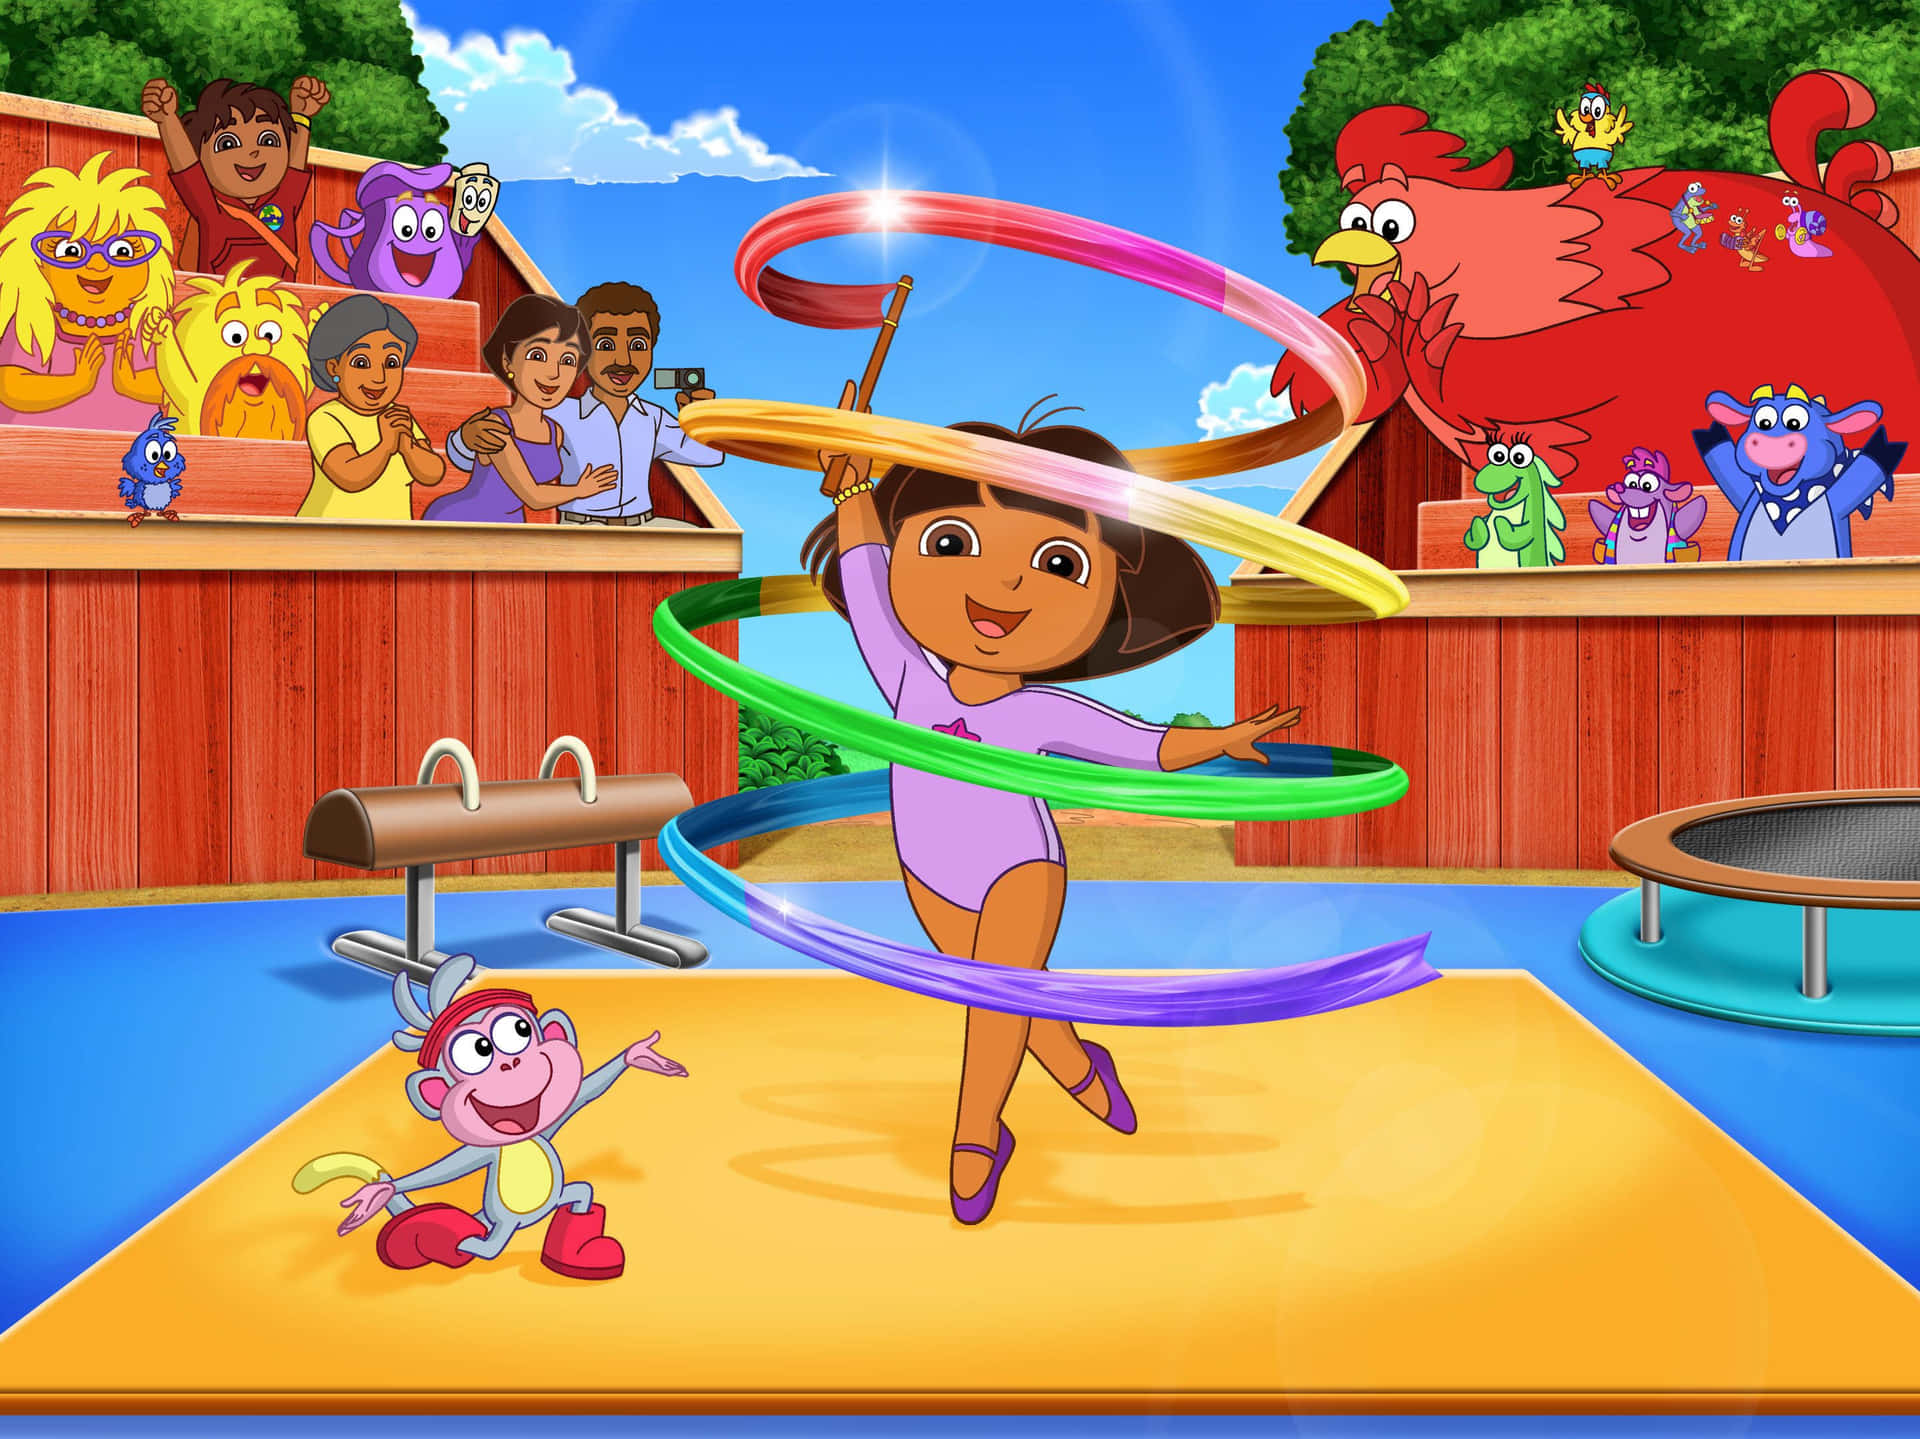 Embark on a new adventure with Dora